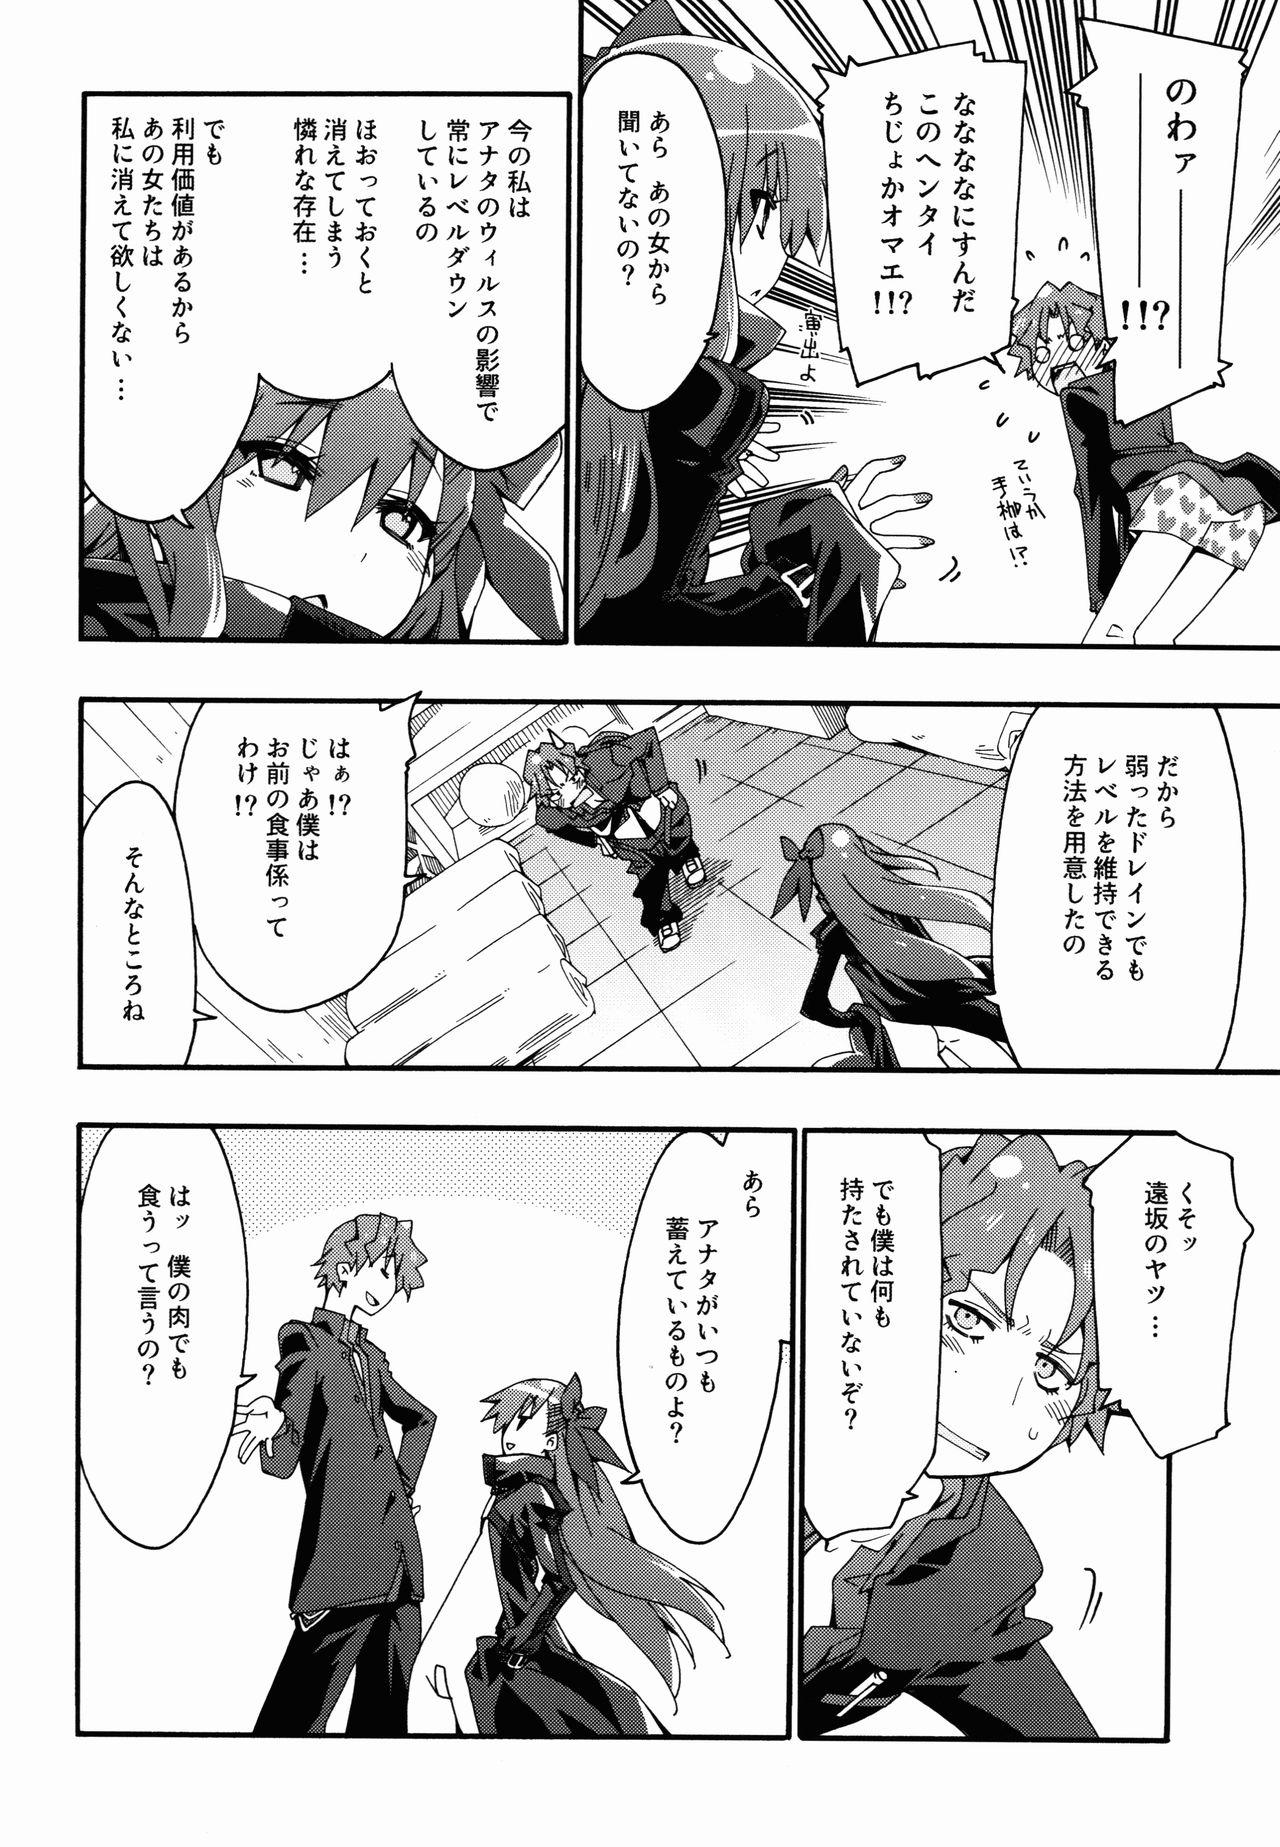 Thot Melty/kiss - Fate extra Internal - Page 10